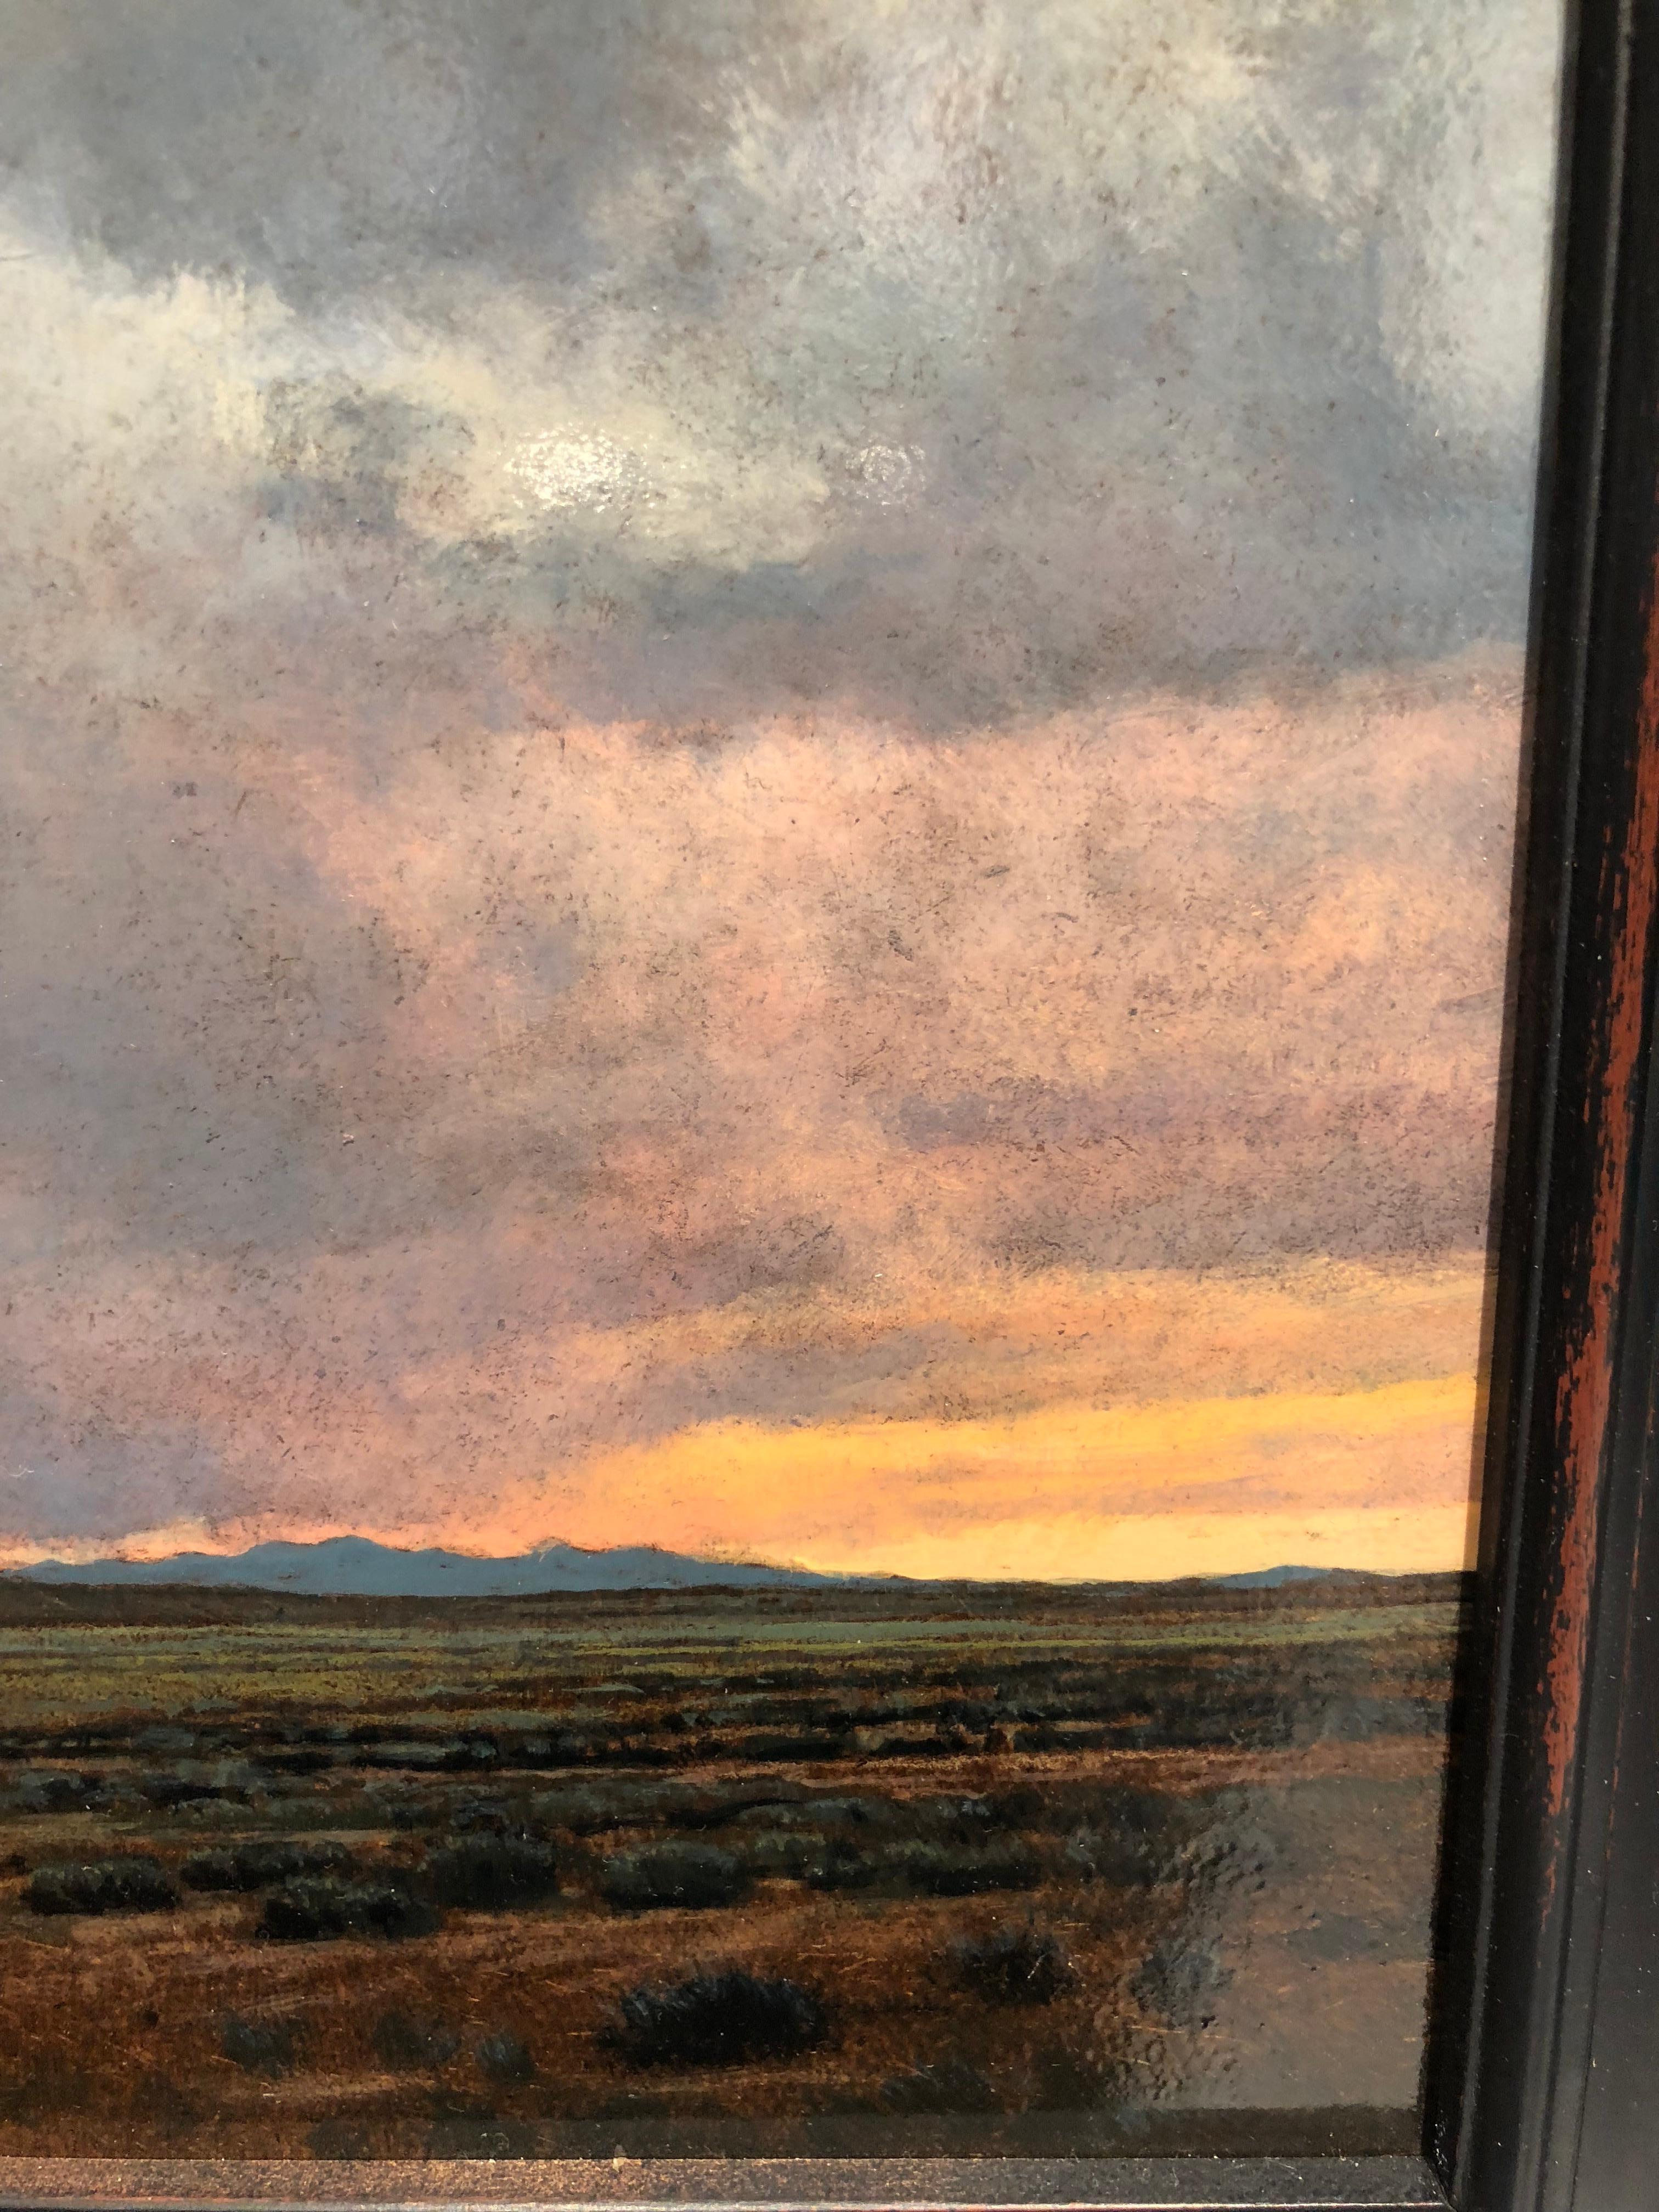 Sunset South of Galisteo, NM - Small Scale Landscape Painting, Oil on Panel 4